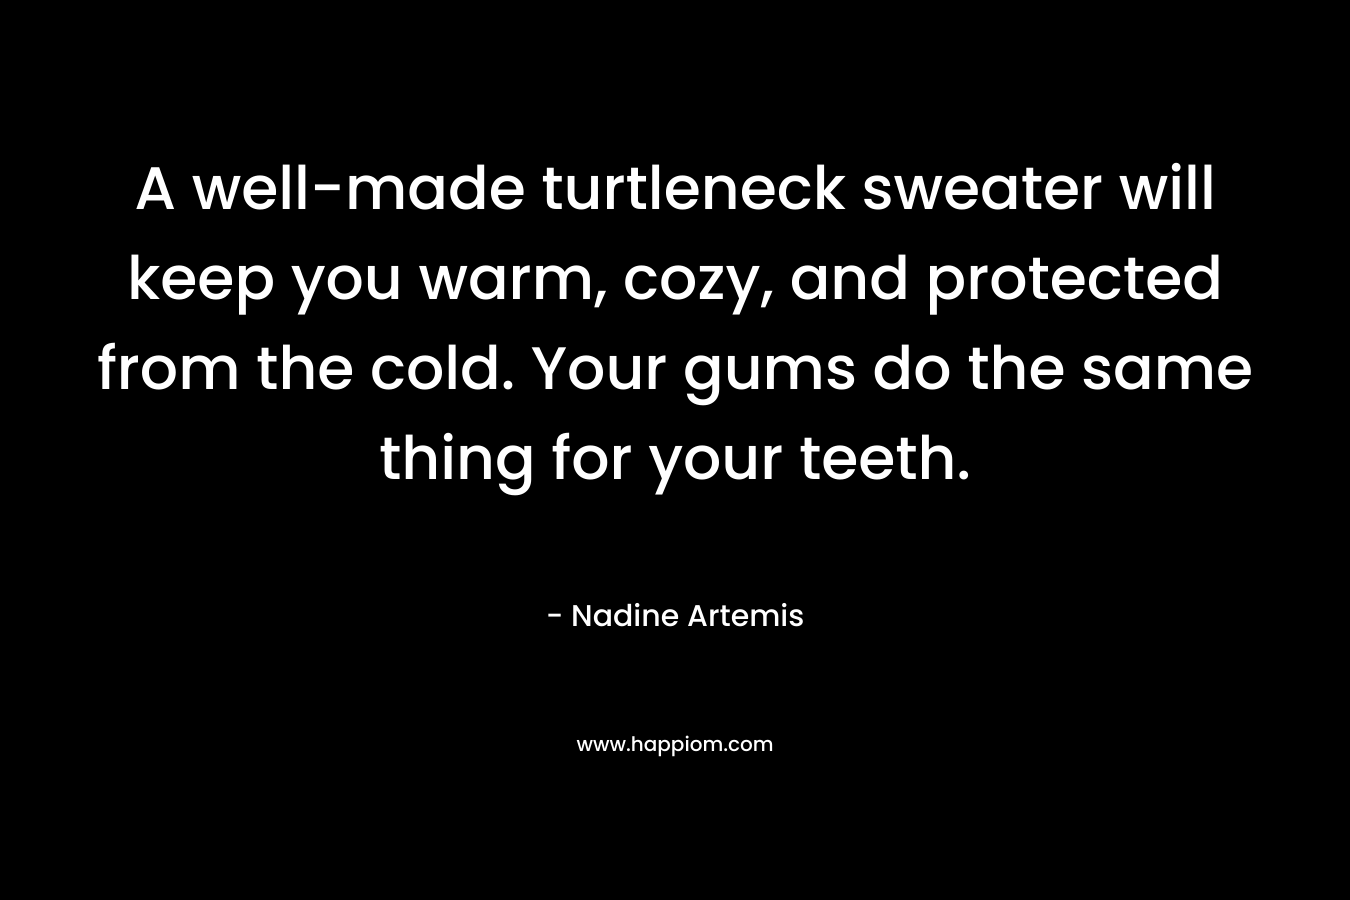 A well-made turtleneck sweater will keep you warm, cozy, and protected from the cold. Your gums do the same thing for your teeth. – Nadine Artemis